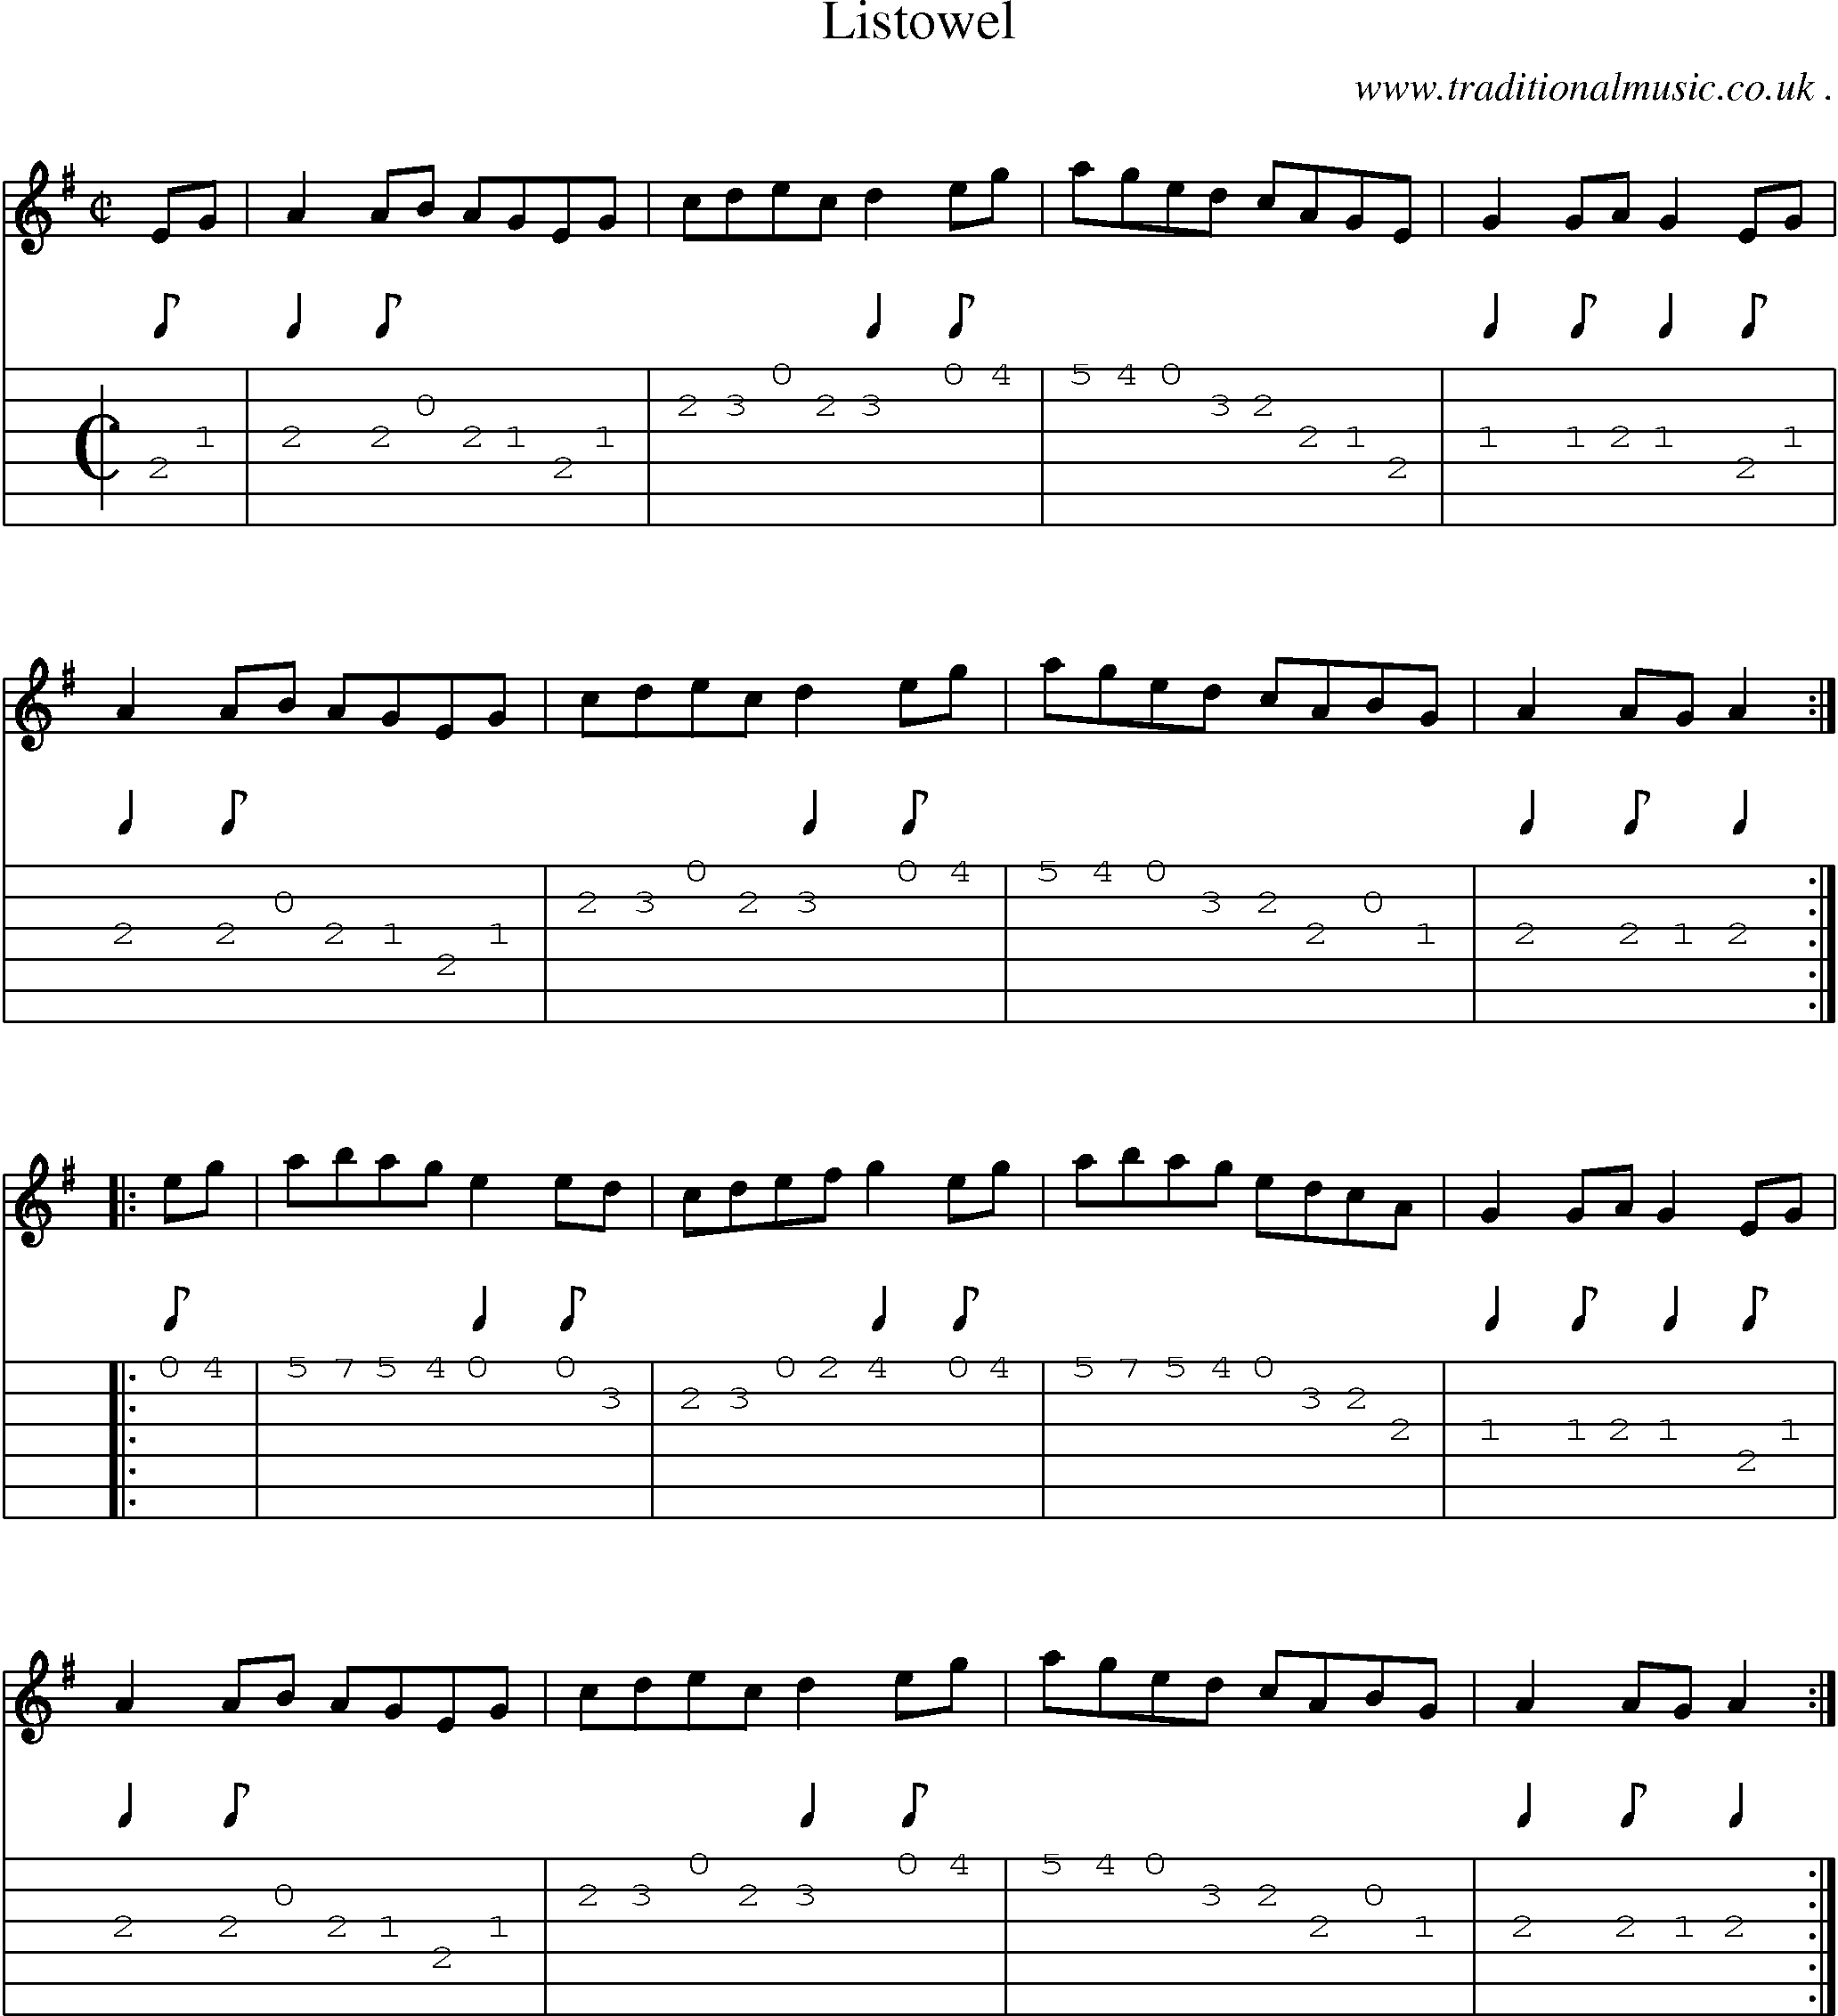 Sheet-Music and Guitar Tabs for Listowel